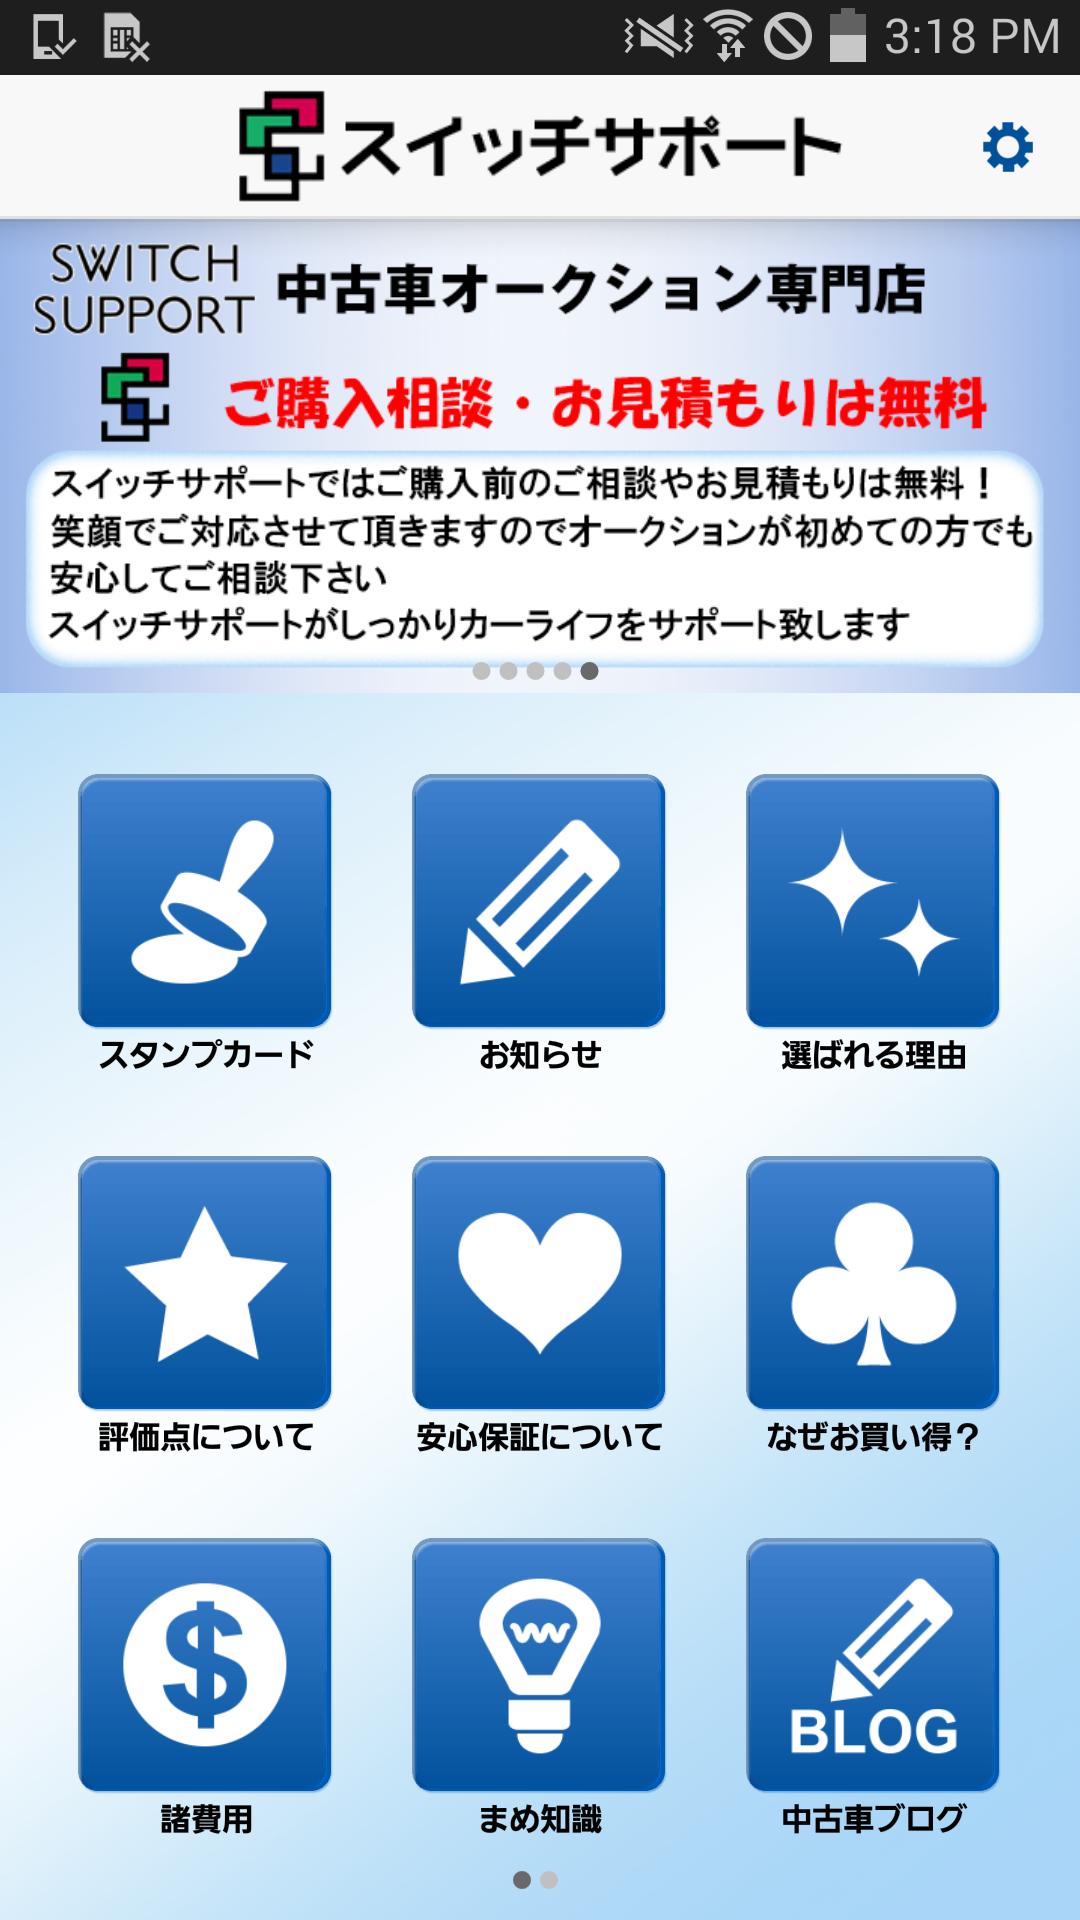 Apk support